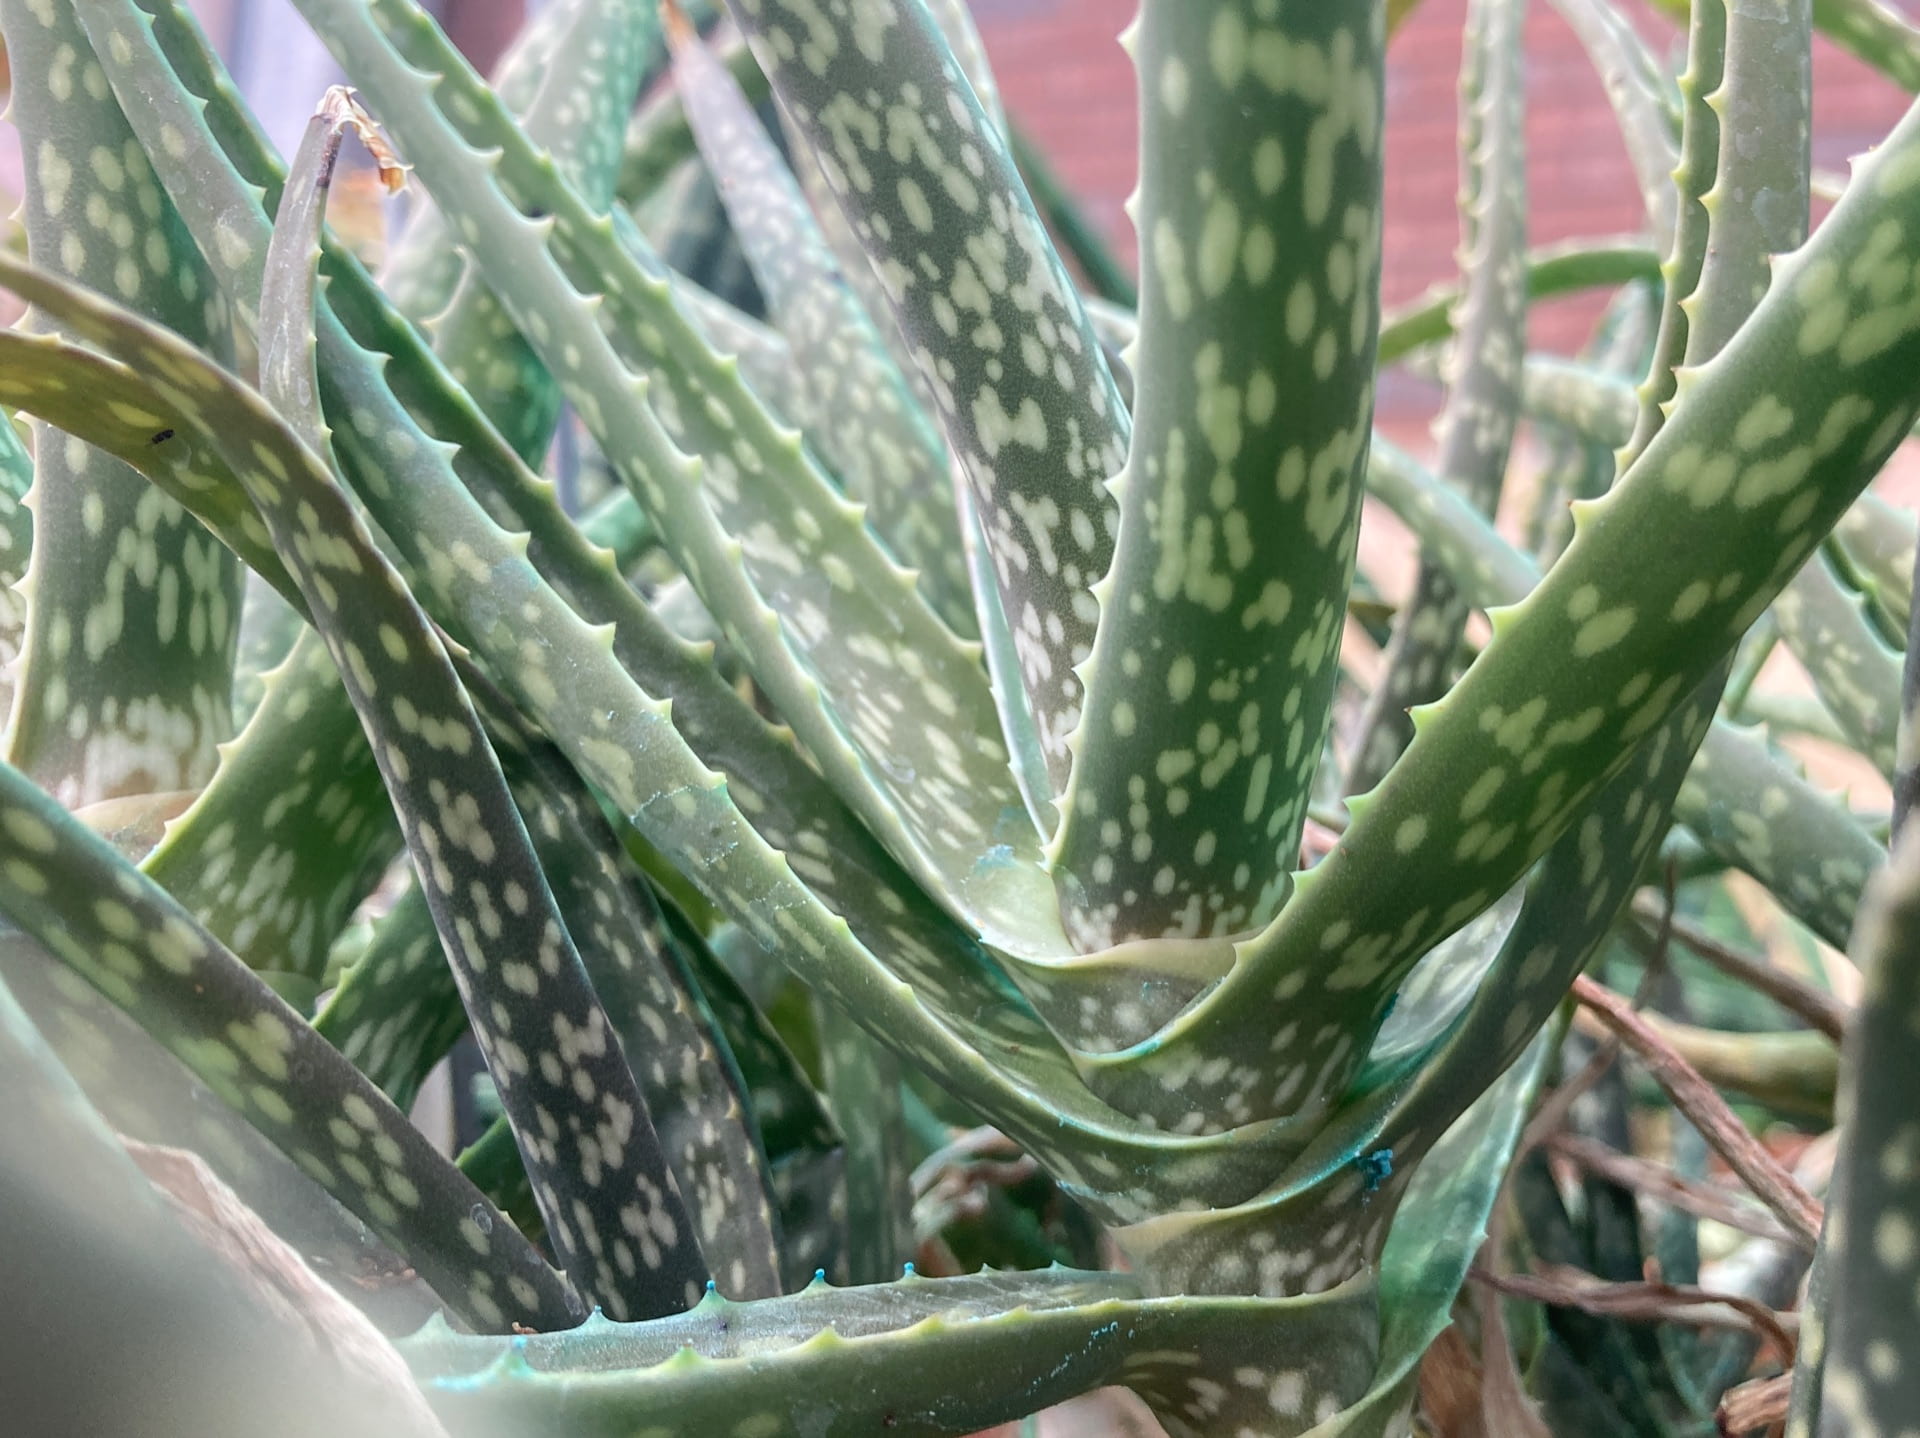 Aloe vera's gelatinous leaves are used medicinally to soothe skin ailments.